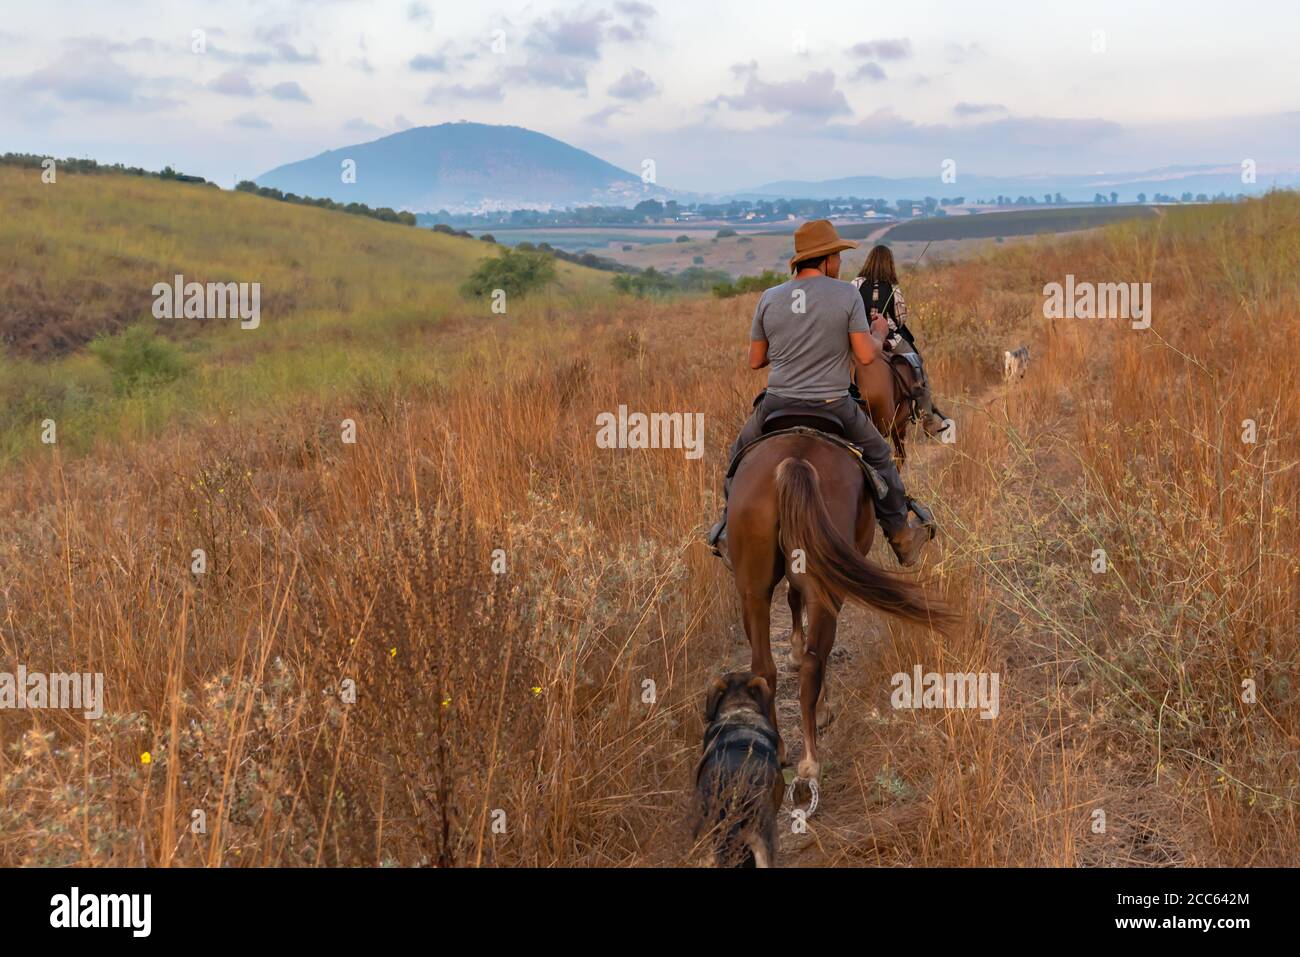 Horse back riding in the Jezreel Valley, Israel. Mount Tabor can be seen in the background Stock Photo